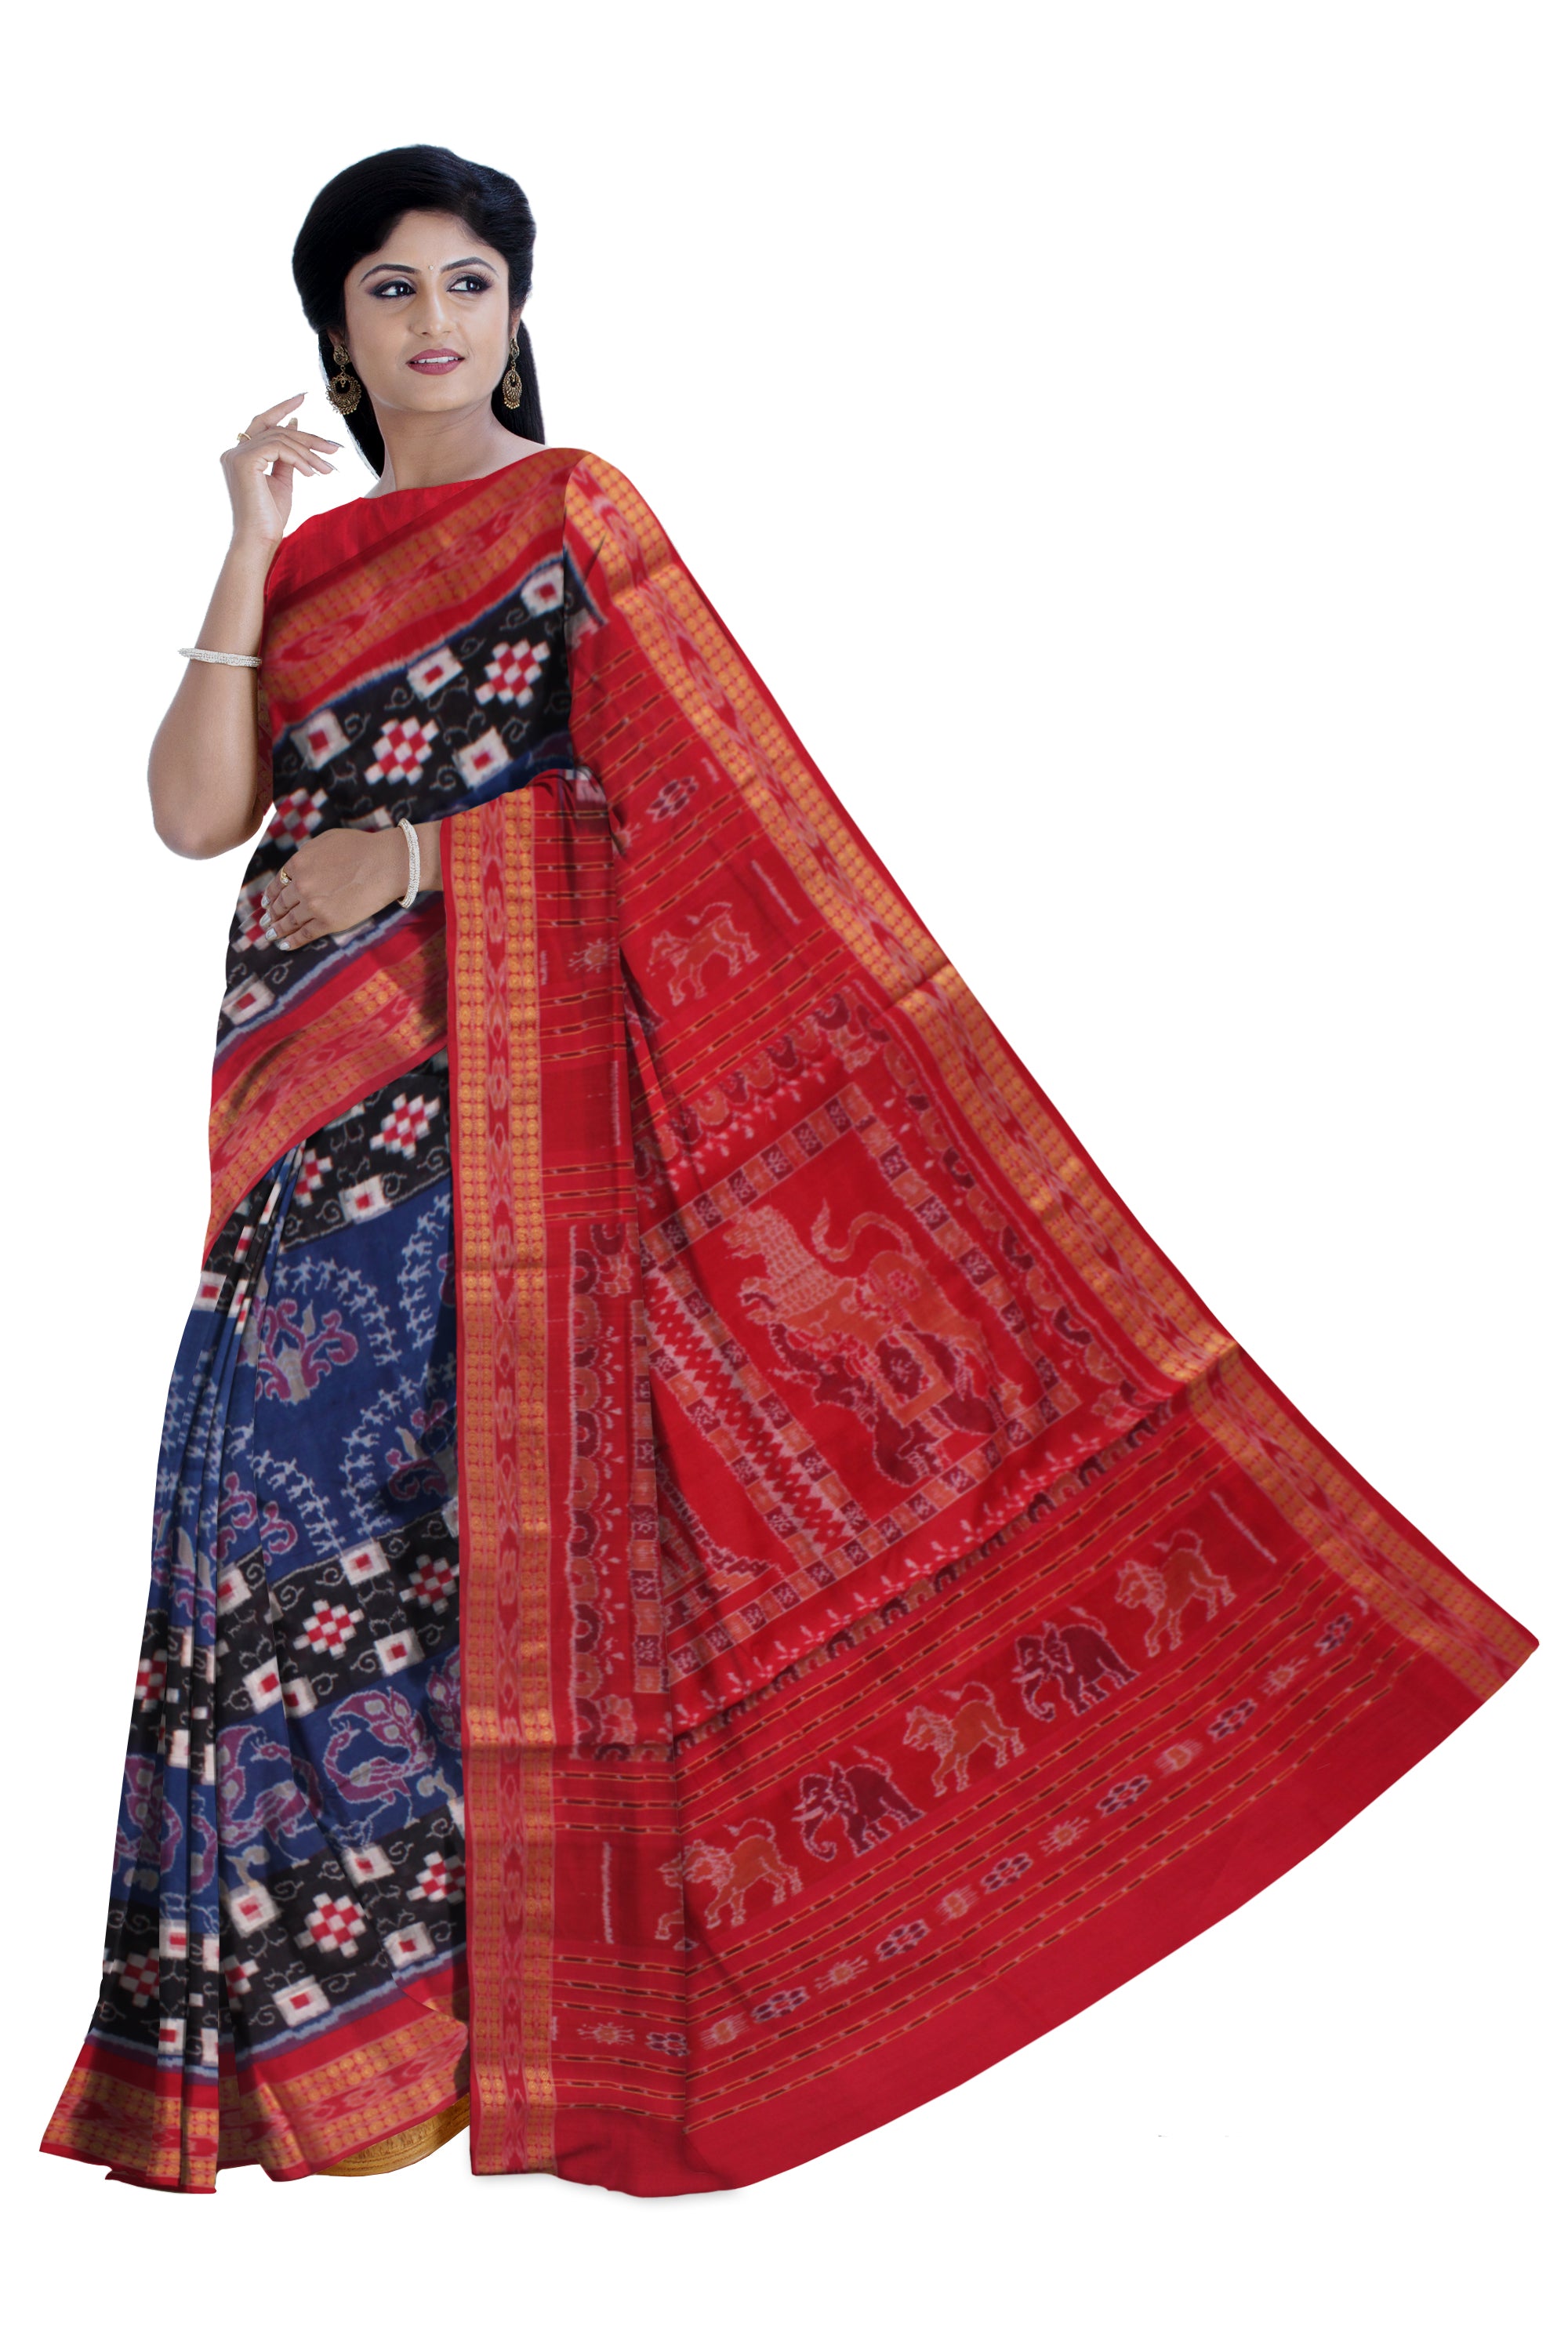 PEACOCK, TERRACOTTA AND PASAPALI PATTERN PURE COTTON SAREE IS SAPPHIRE BLUE,BLACK AND RED COLOR BASE.AVAILABLE WITH MATCHING BLOUSE PIECE. - Koshali Arts & Crafts Enterprise